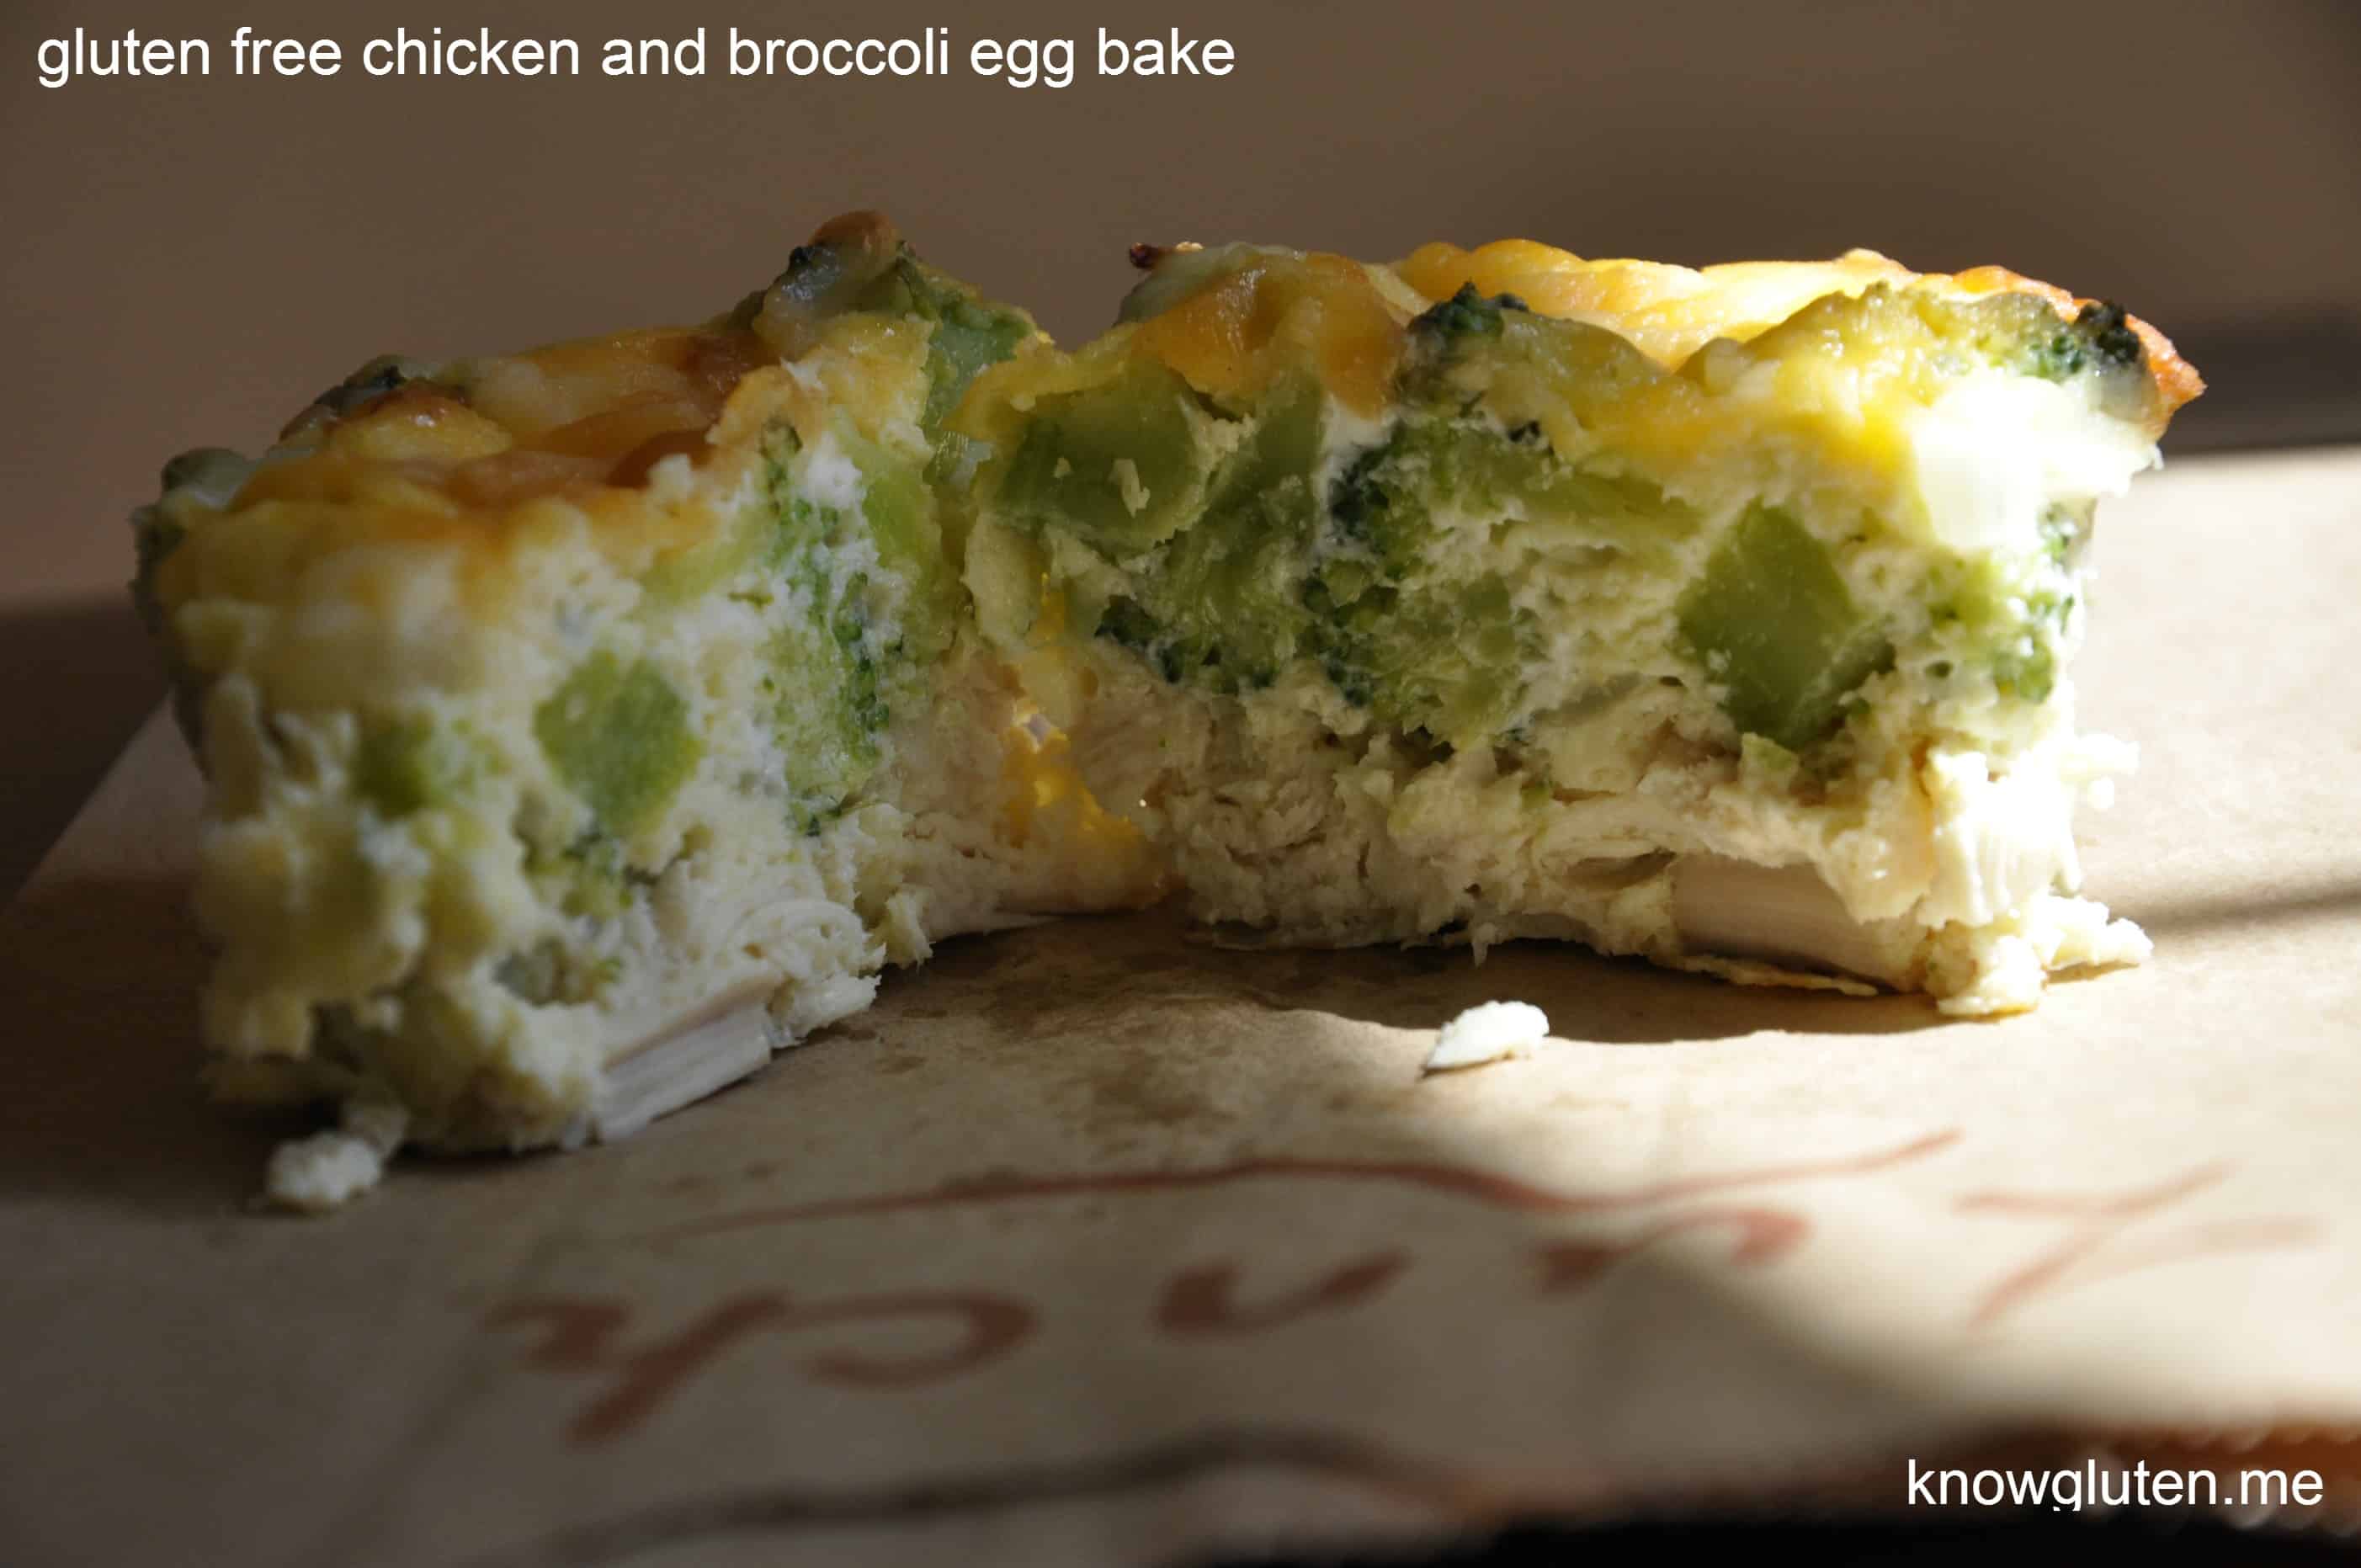 gluten free chicken and broccoli egg bake from know gluten.me